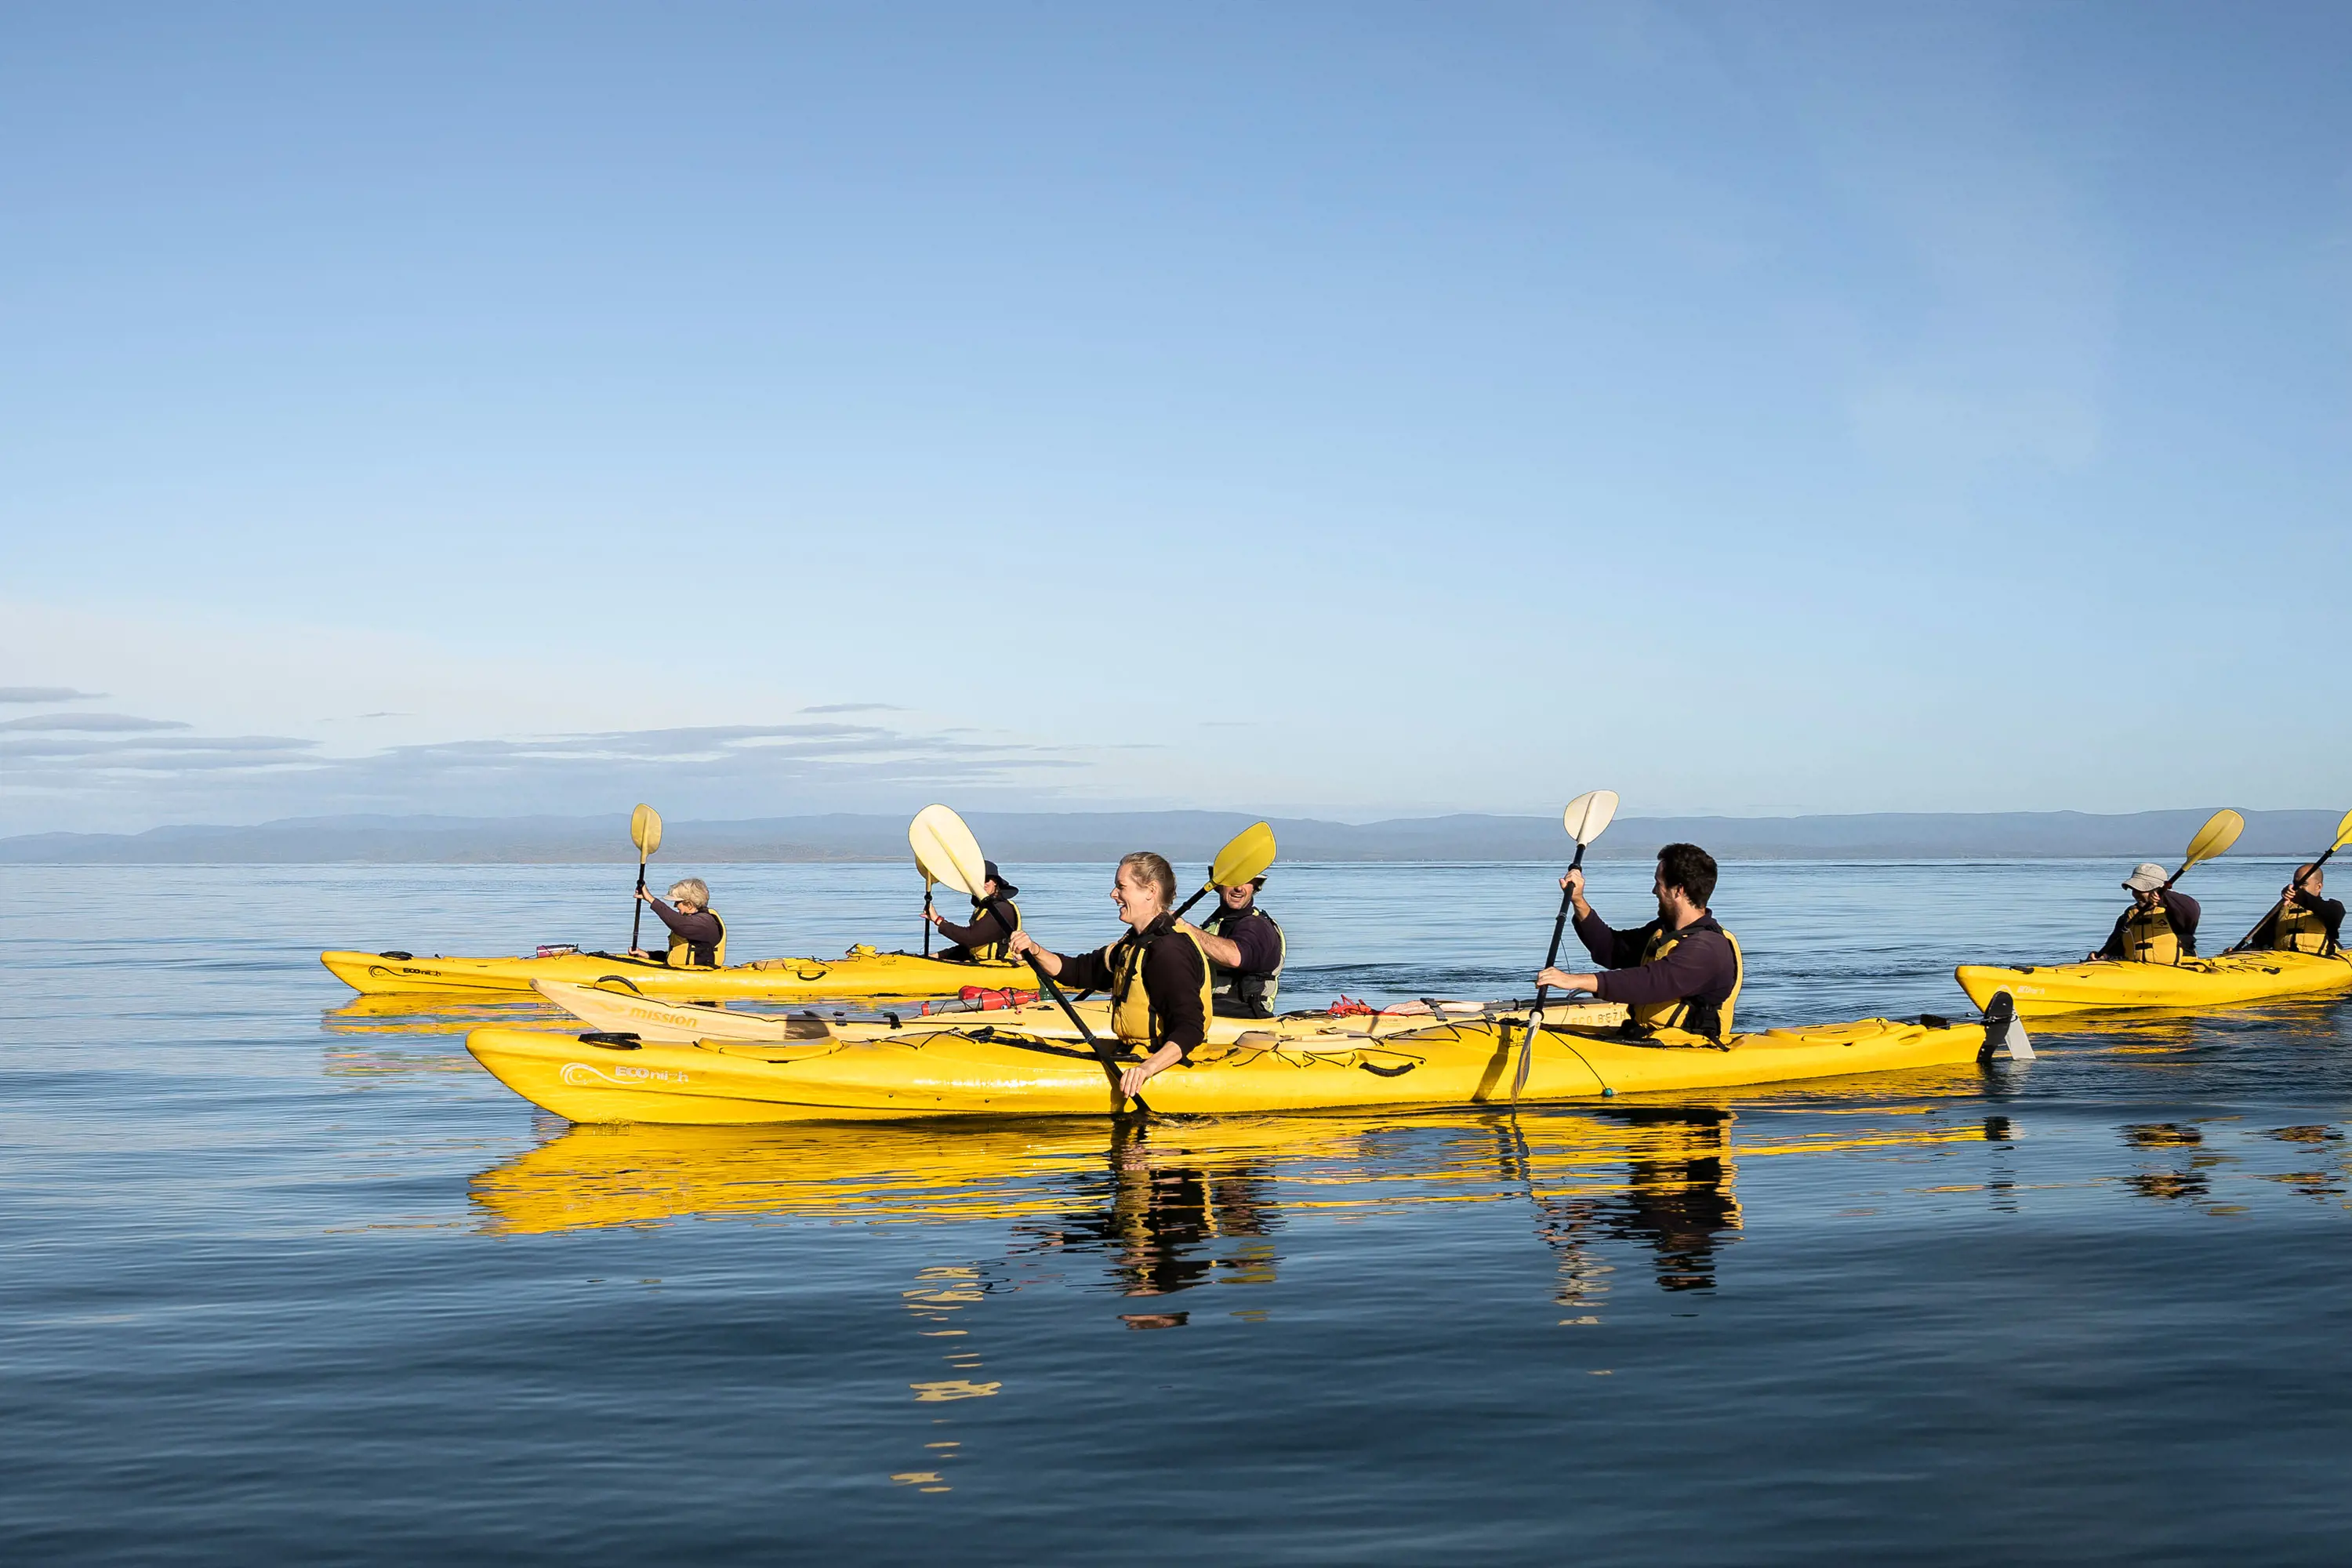 A group of 7 kayakers in bright yellow kayaks paddle across calm, dark blue waters.